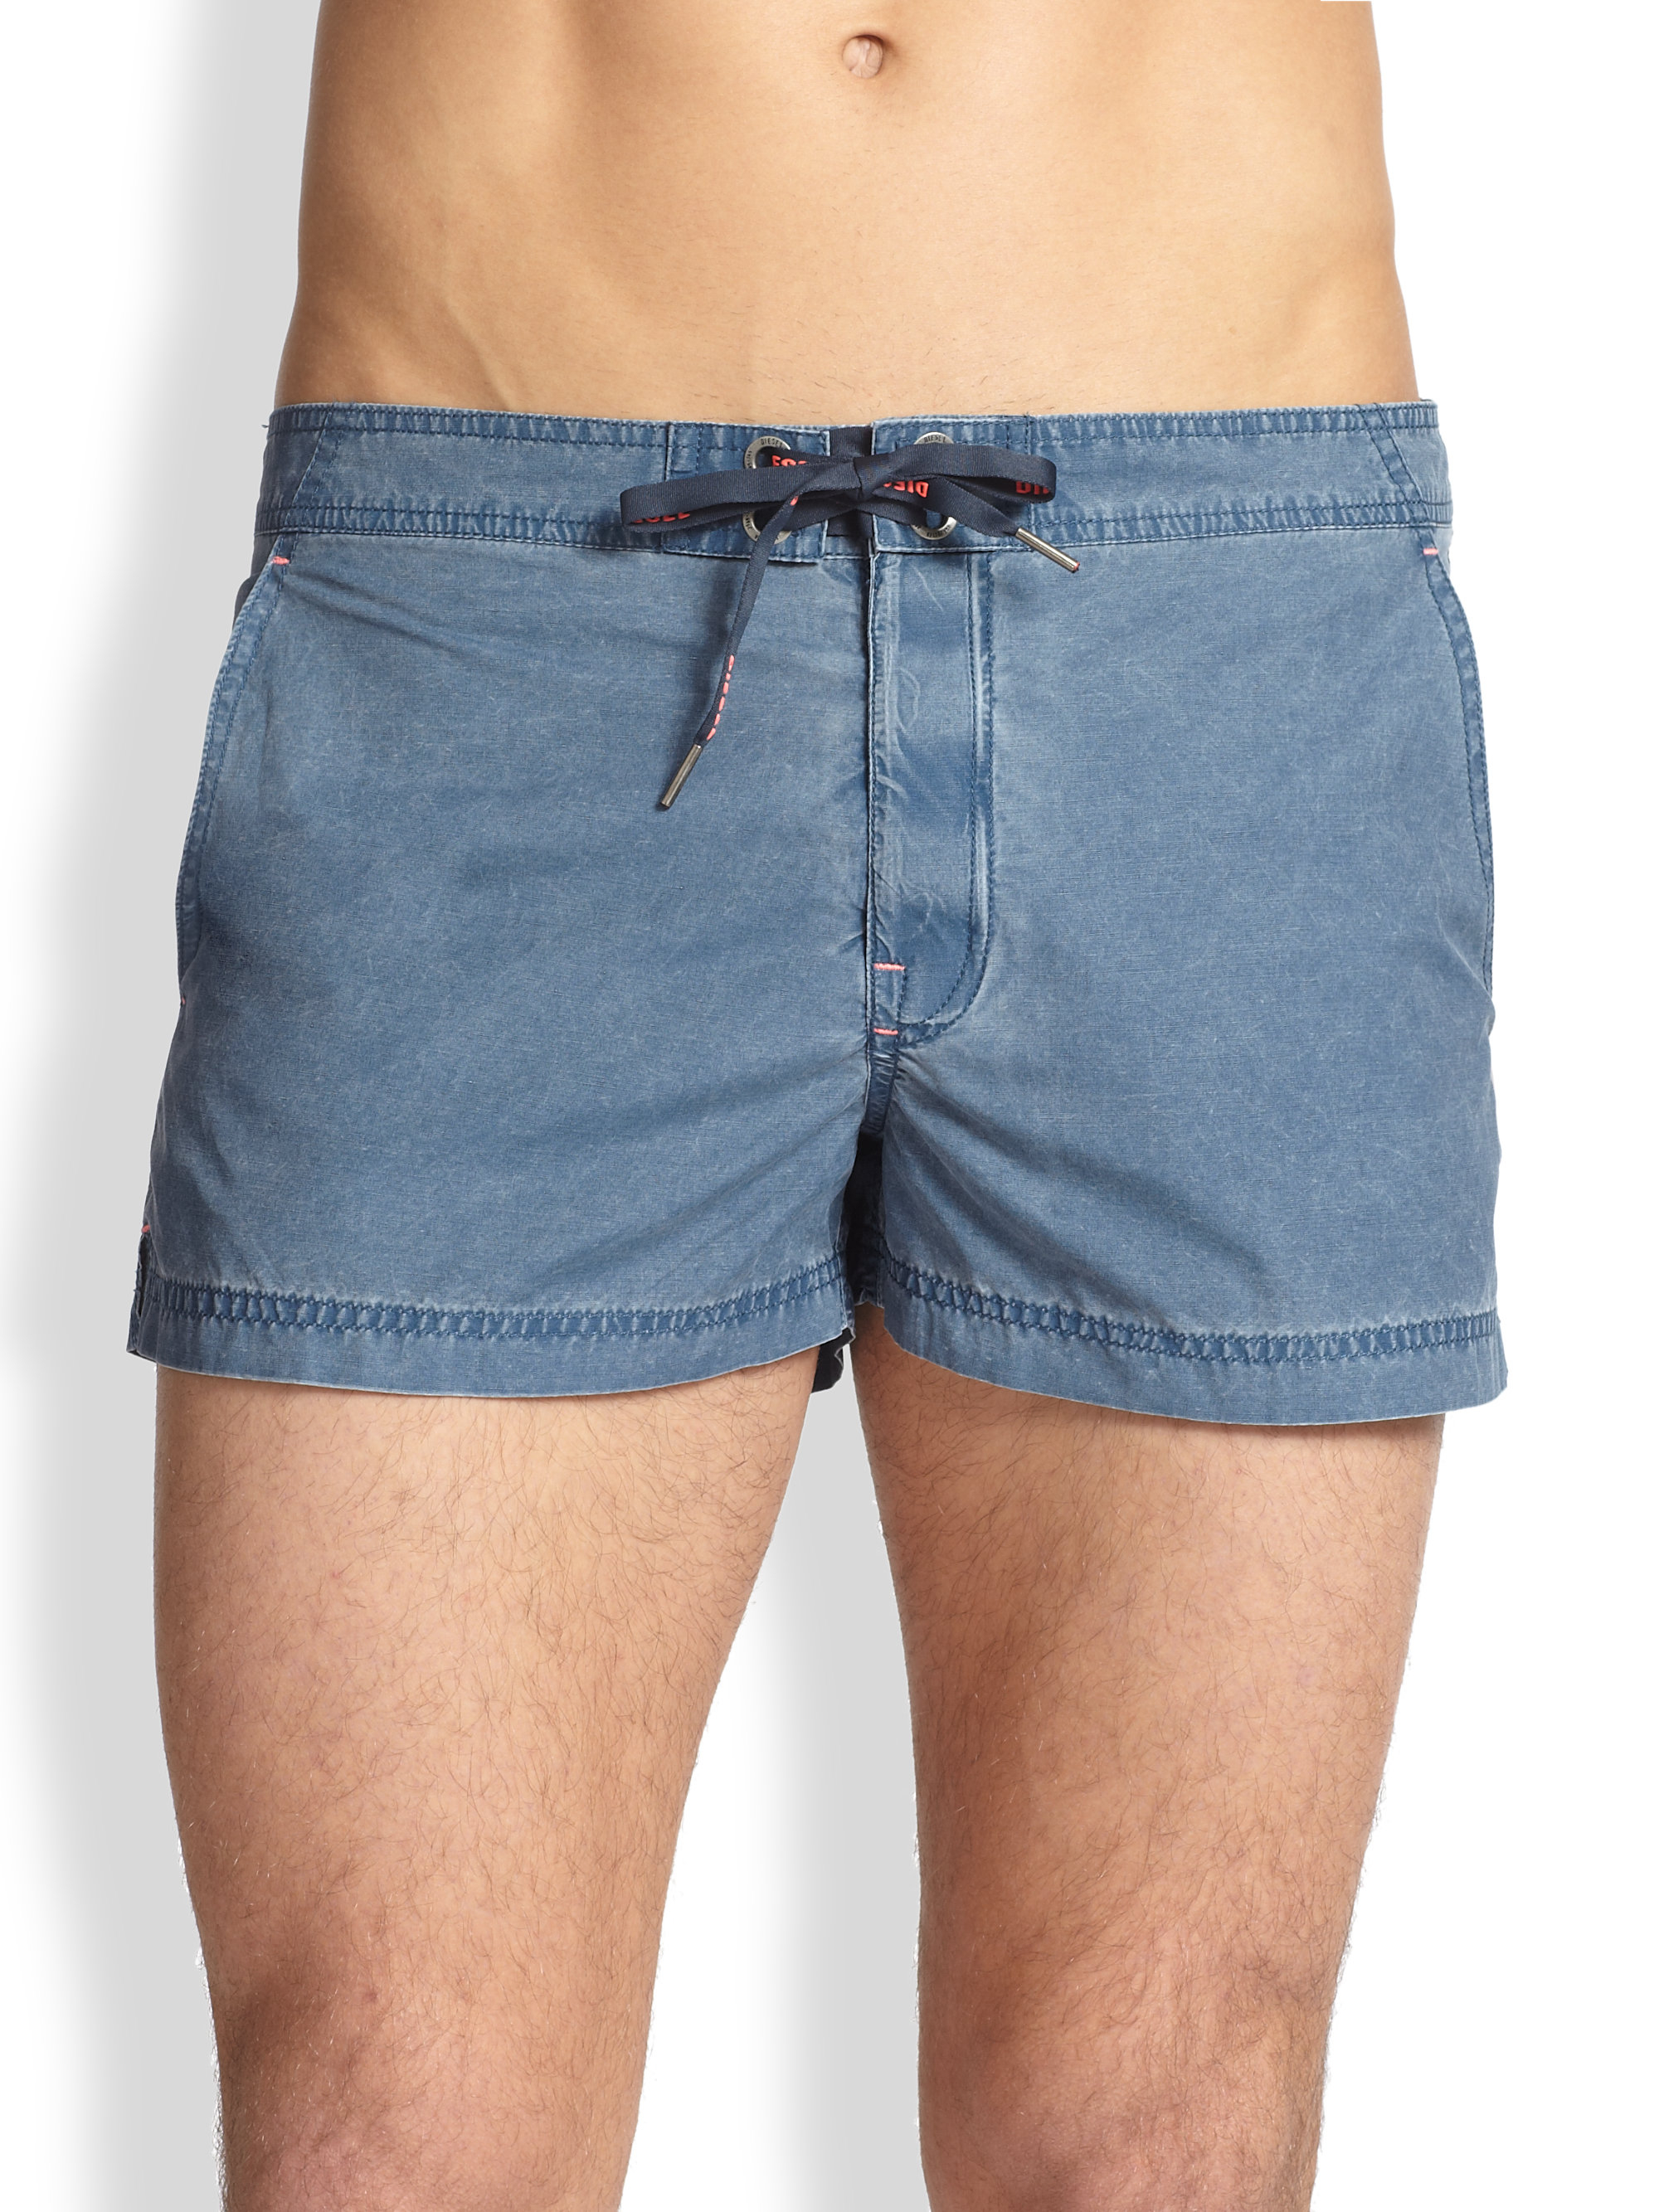 Lyst - Diesel Coral Rif Stretch Cotton Swim Shorts in Blue for Men